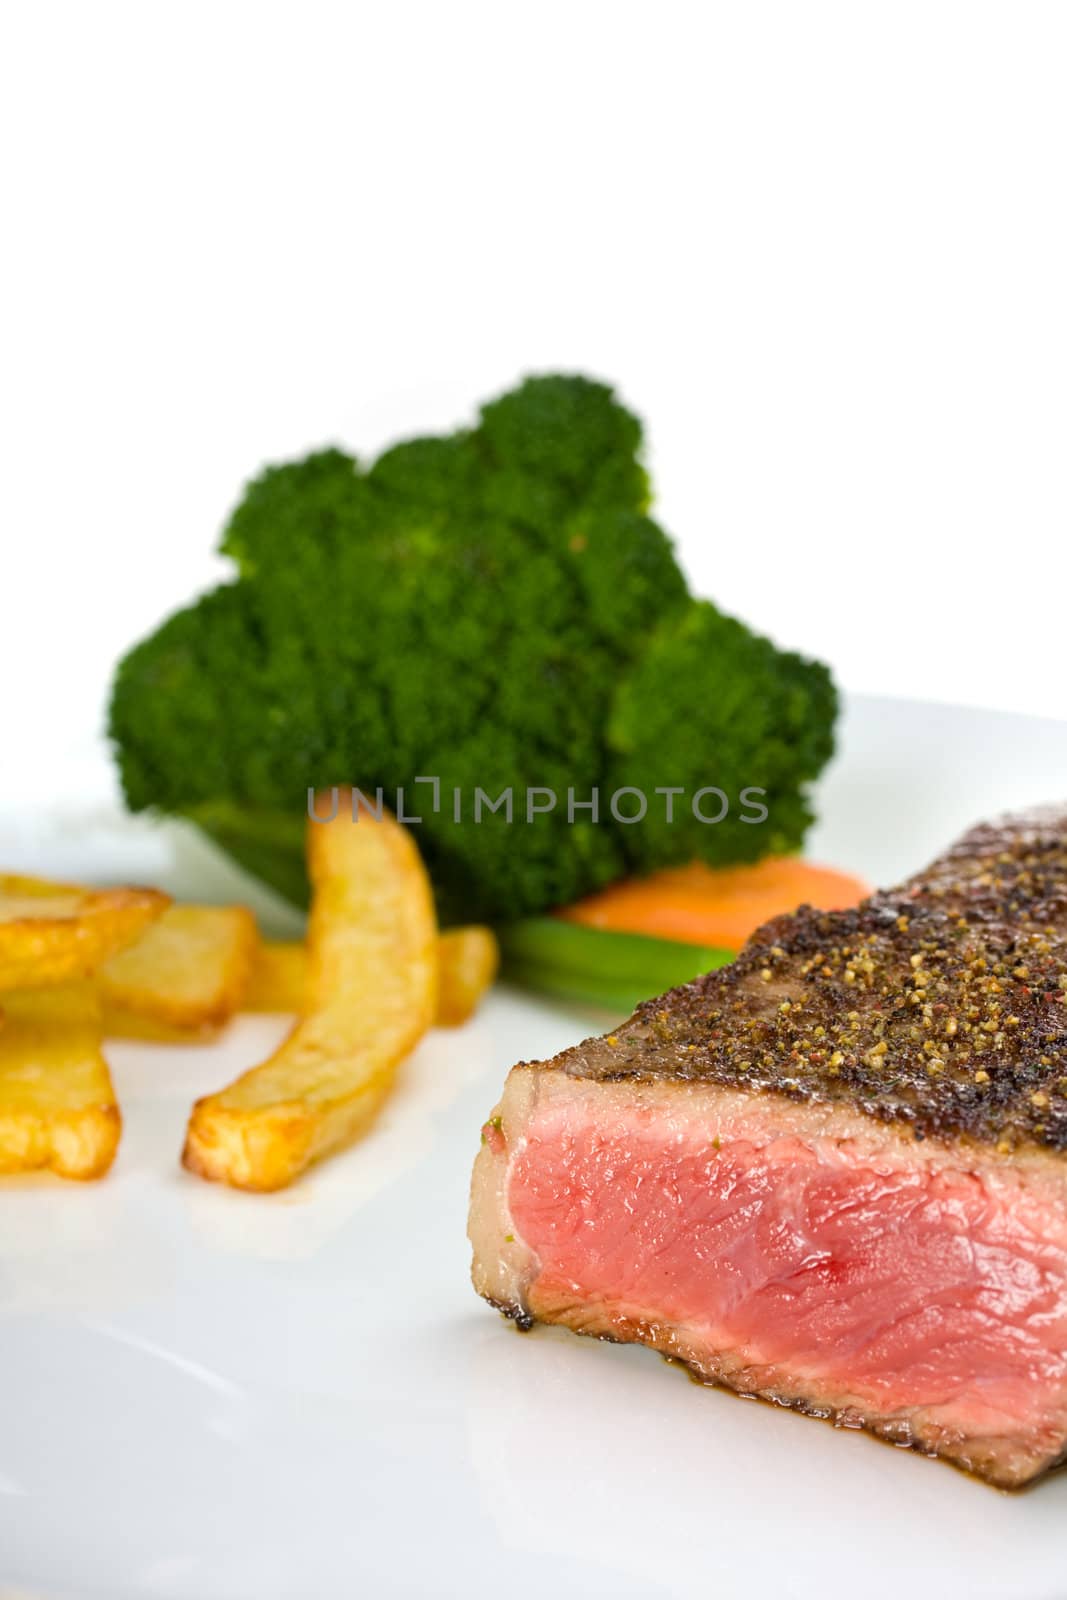 grilled steak on a plate with fries by bernjuer